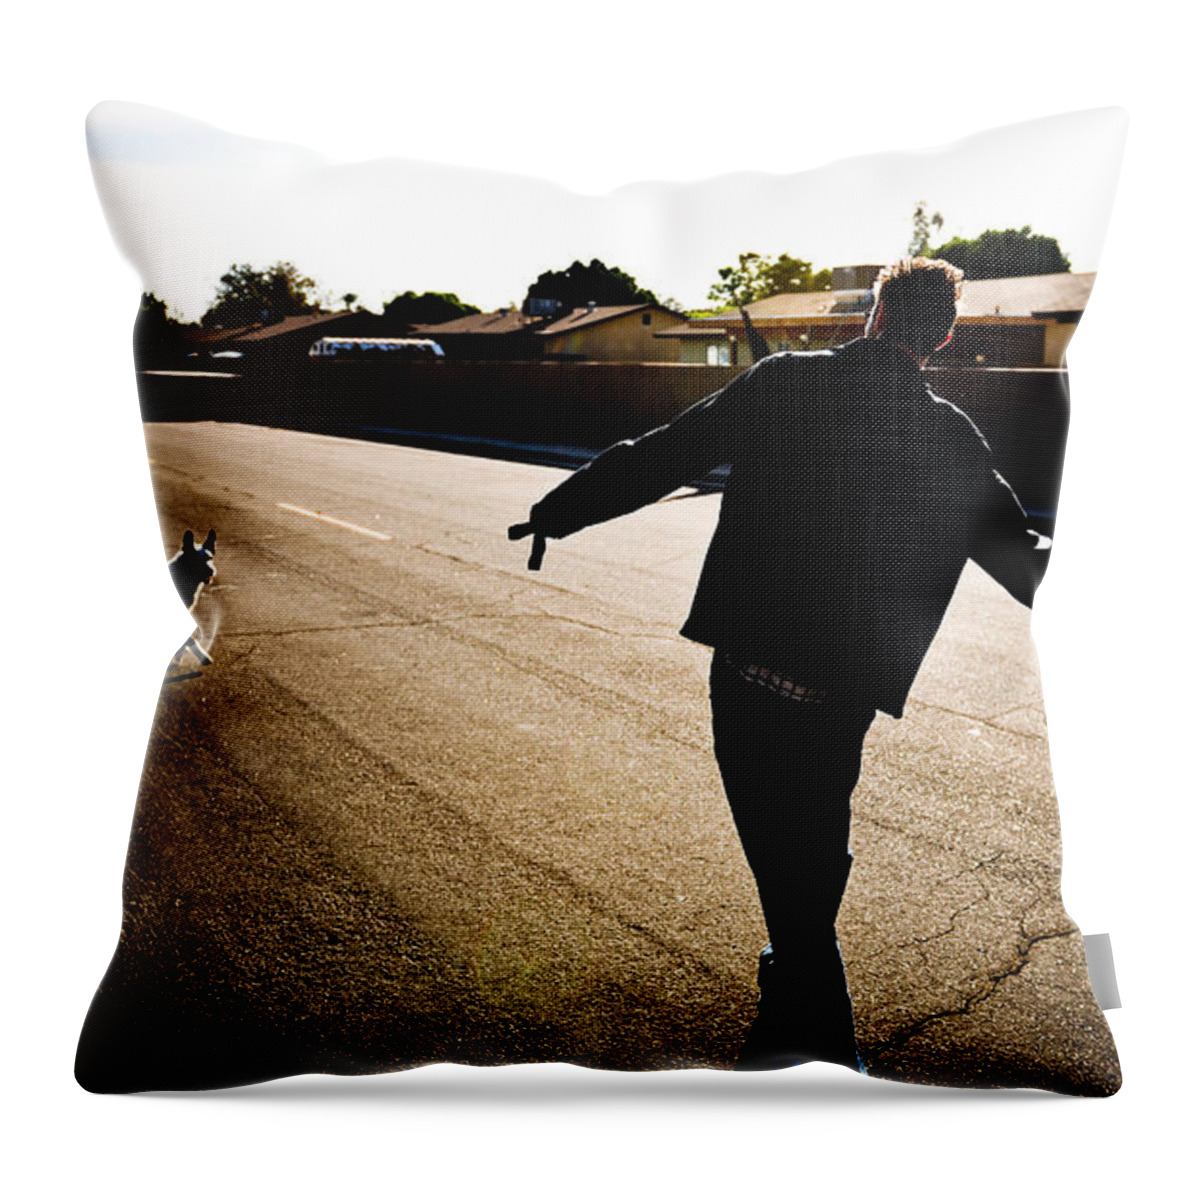 Fetch Throw Pillow featuring the photograph Fetch by Scott Sawyer